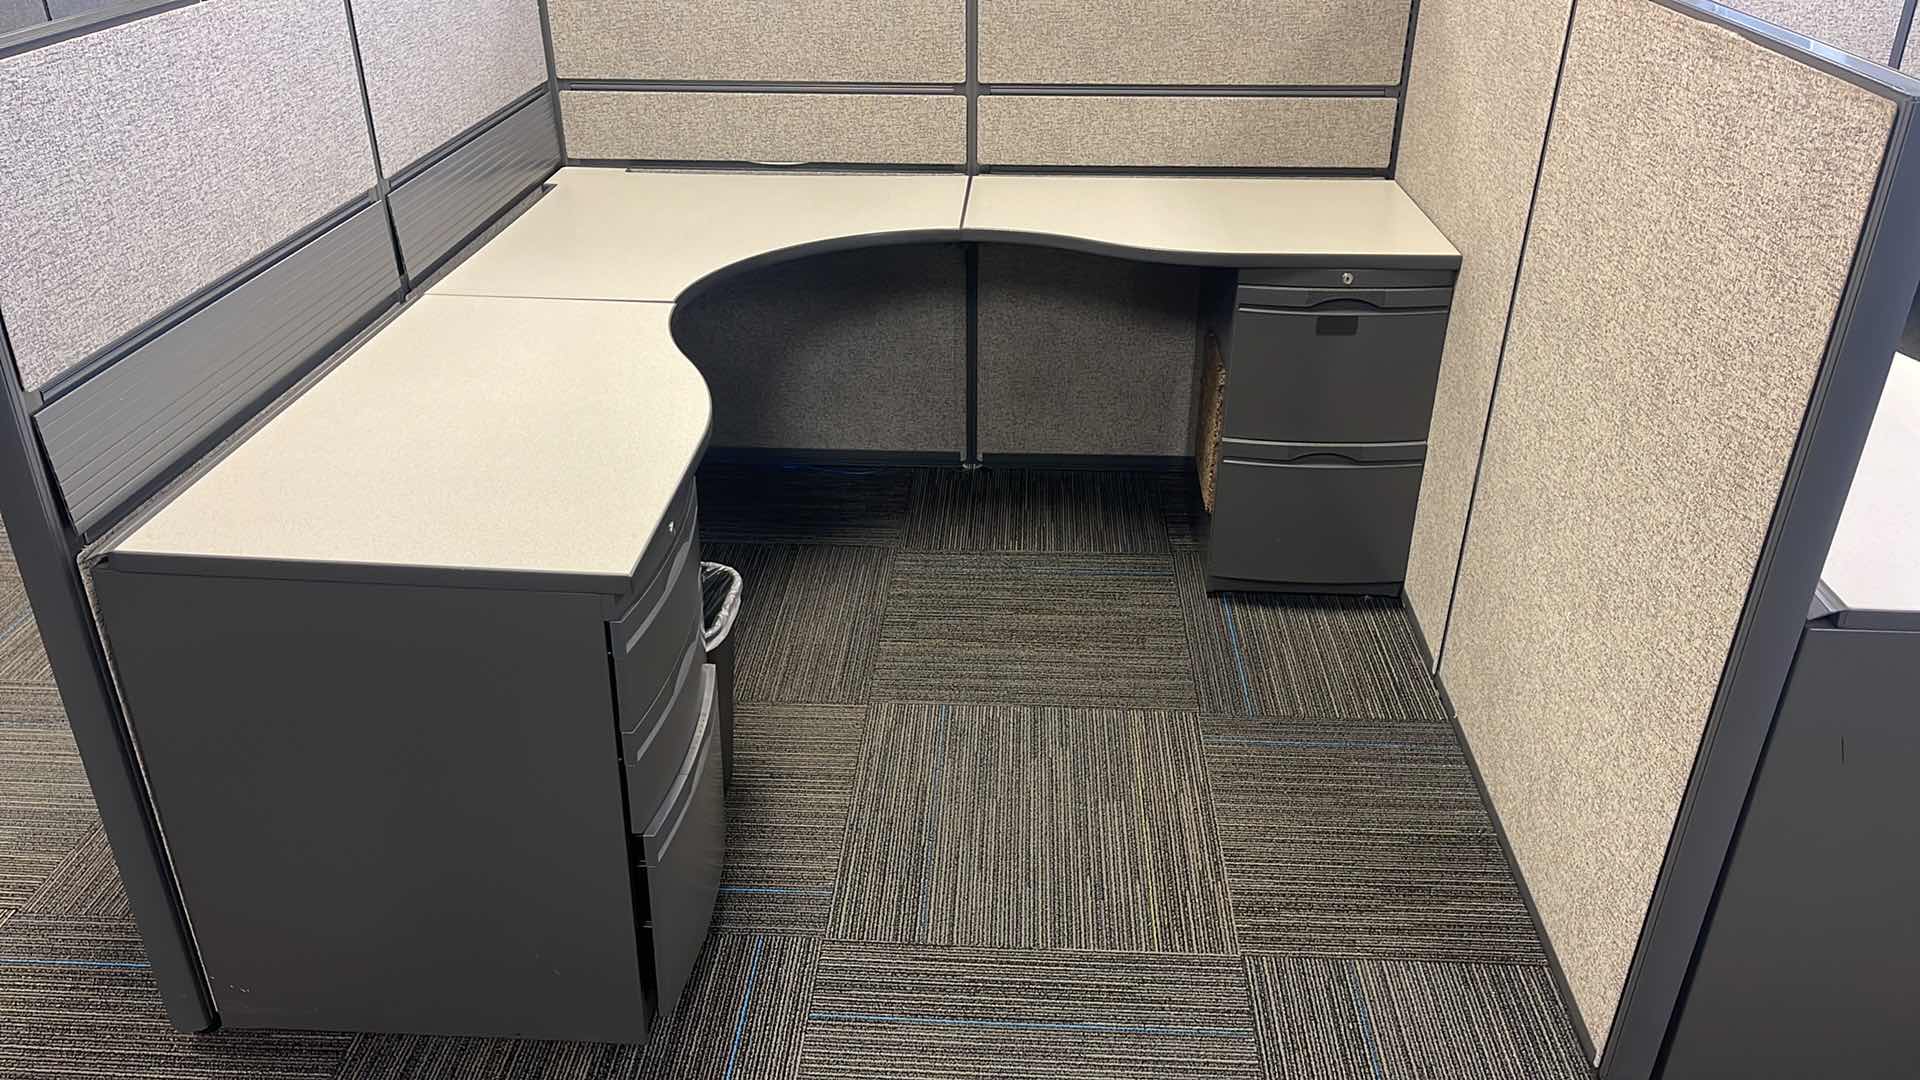 Photo 3 of 6 PC CUBICAL SET W 5 DRAWER MEDAL BASE DESKS 76” X 76” H50” (BUYER TO DISASSEMBLE & REMOVE FROM 2ND STORY OFFICE BUILDING W ELEVATOR)